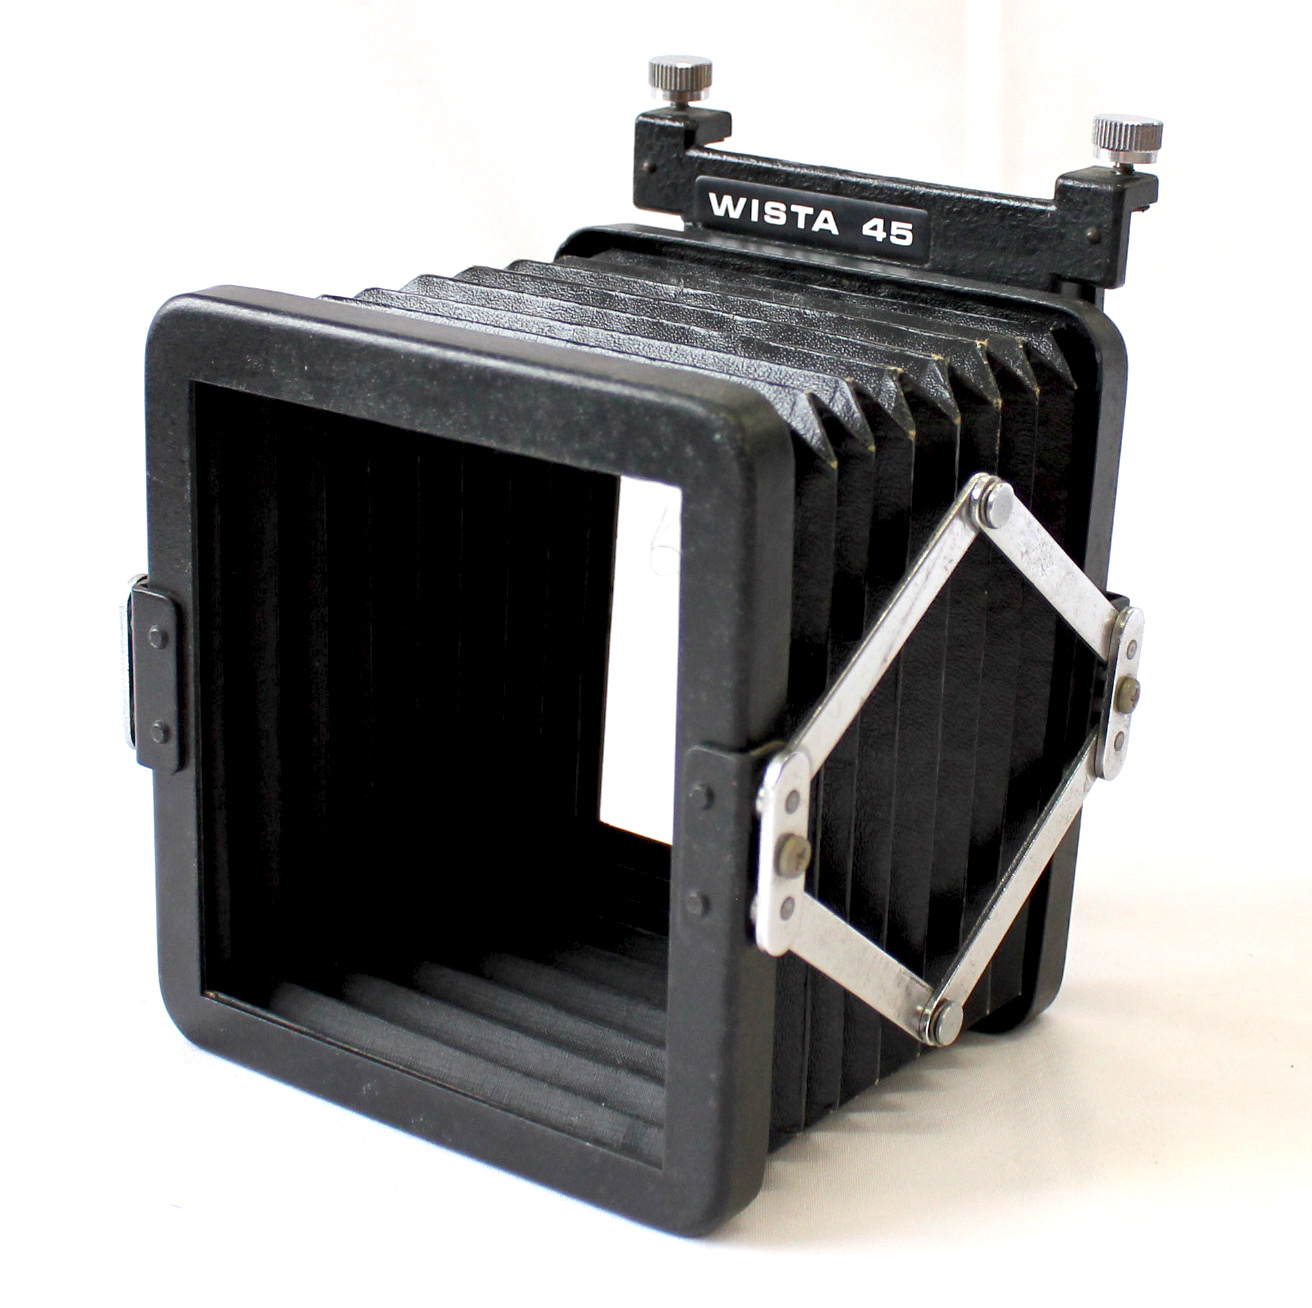 Japan Used Camera Shop | Wista Bellows Lens Hood Shade for Wista 45 Large Format Camera from Japan